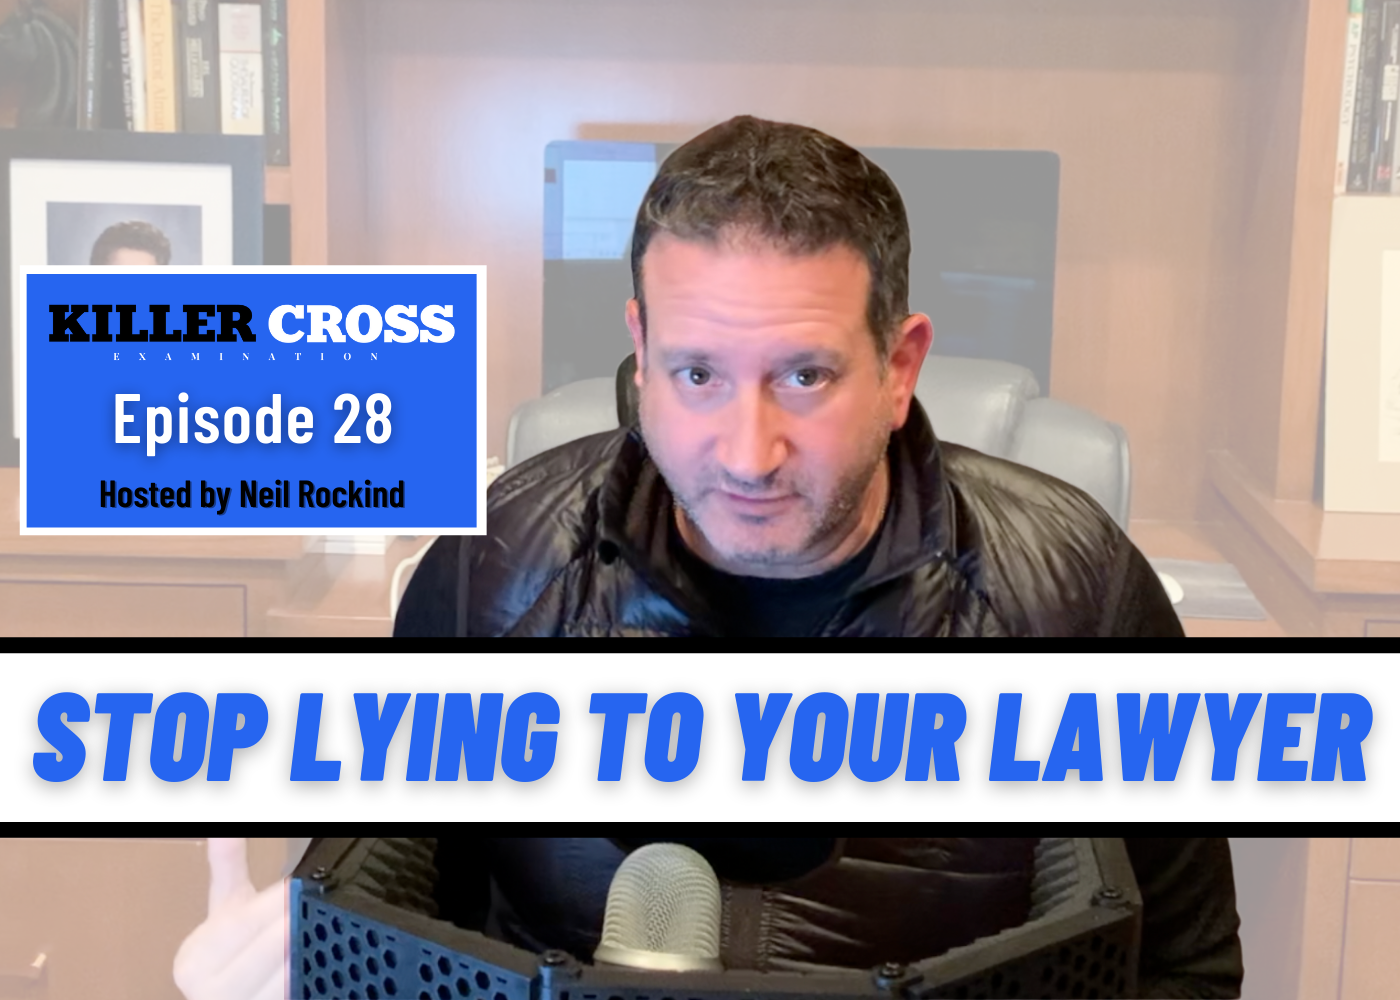 Episode 28: Stop Lying to Your Lawyer